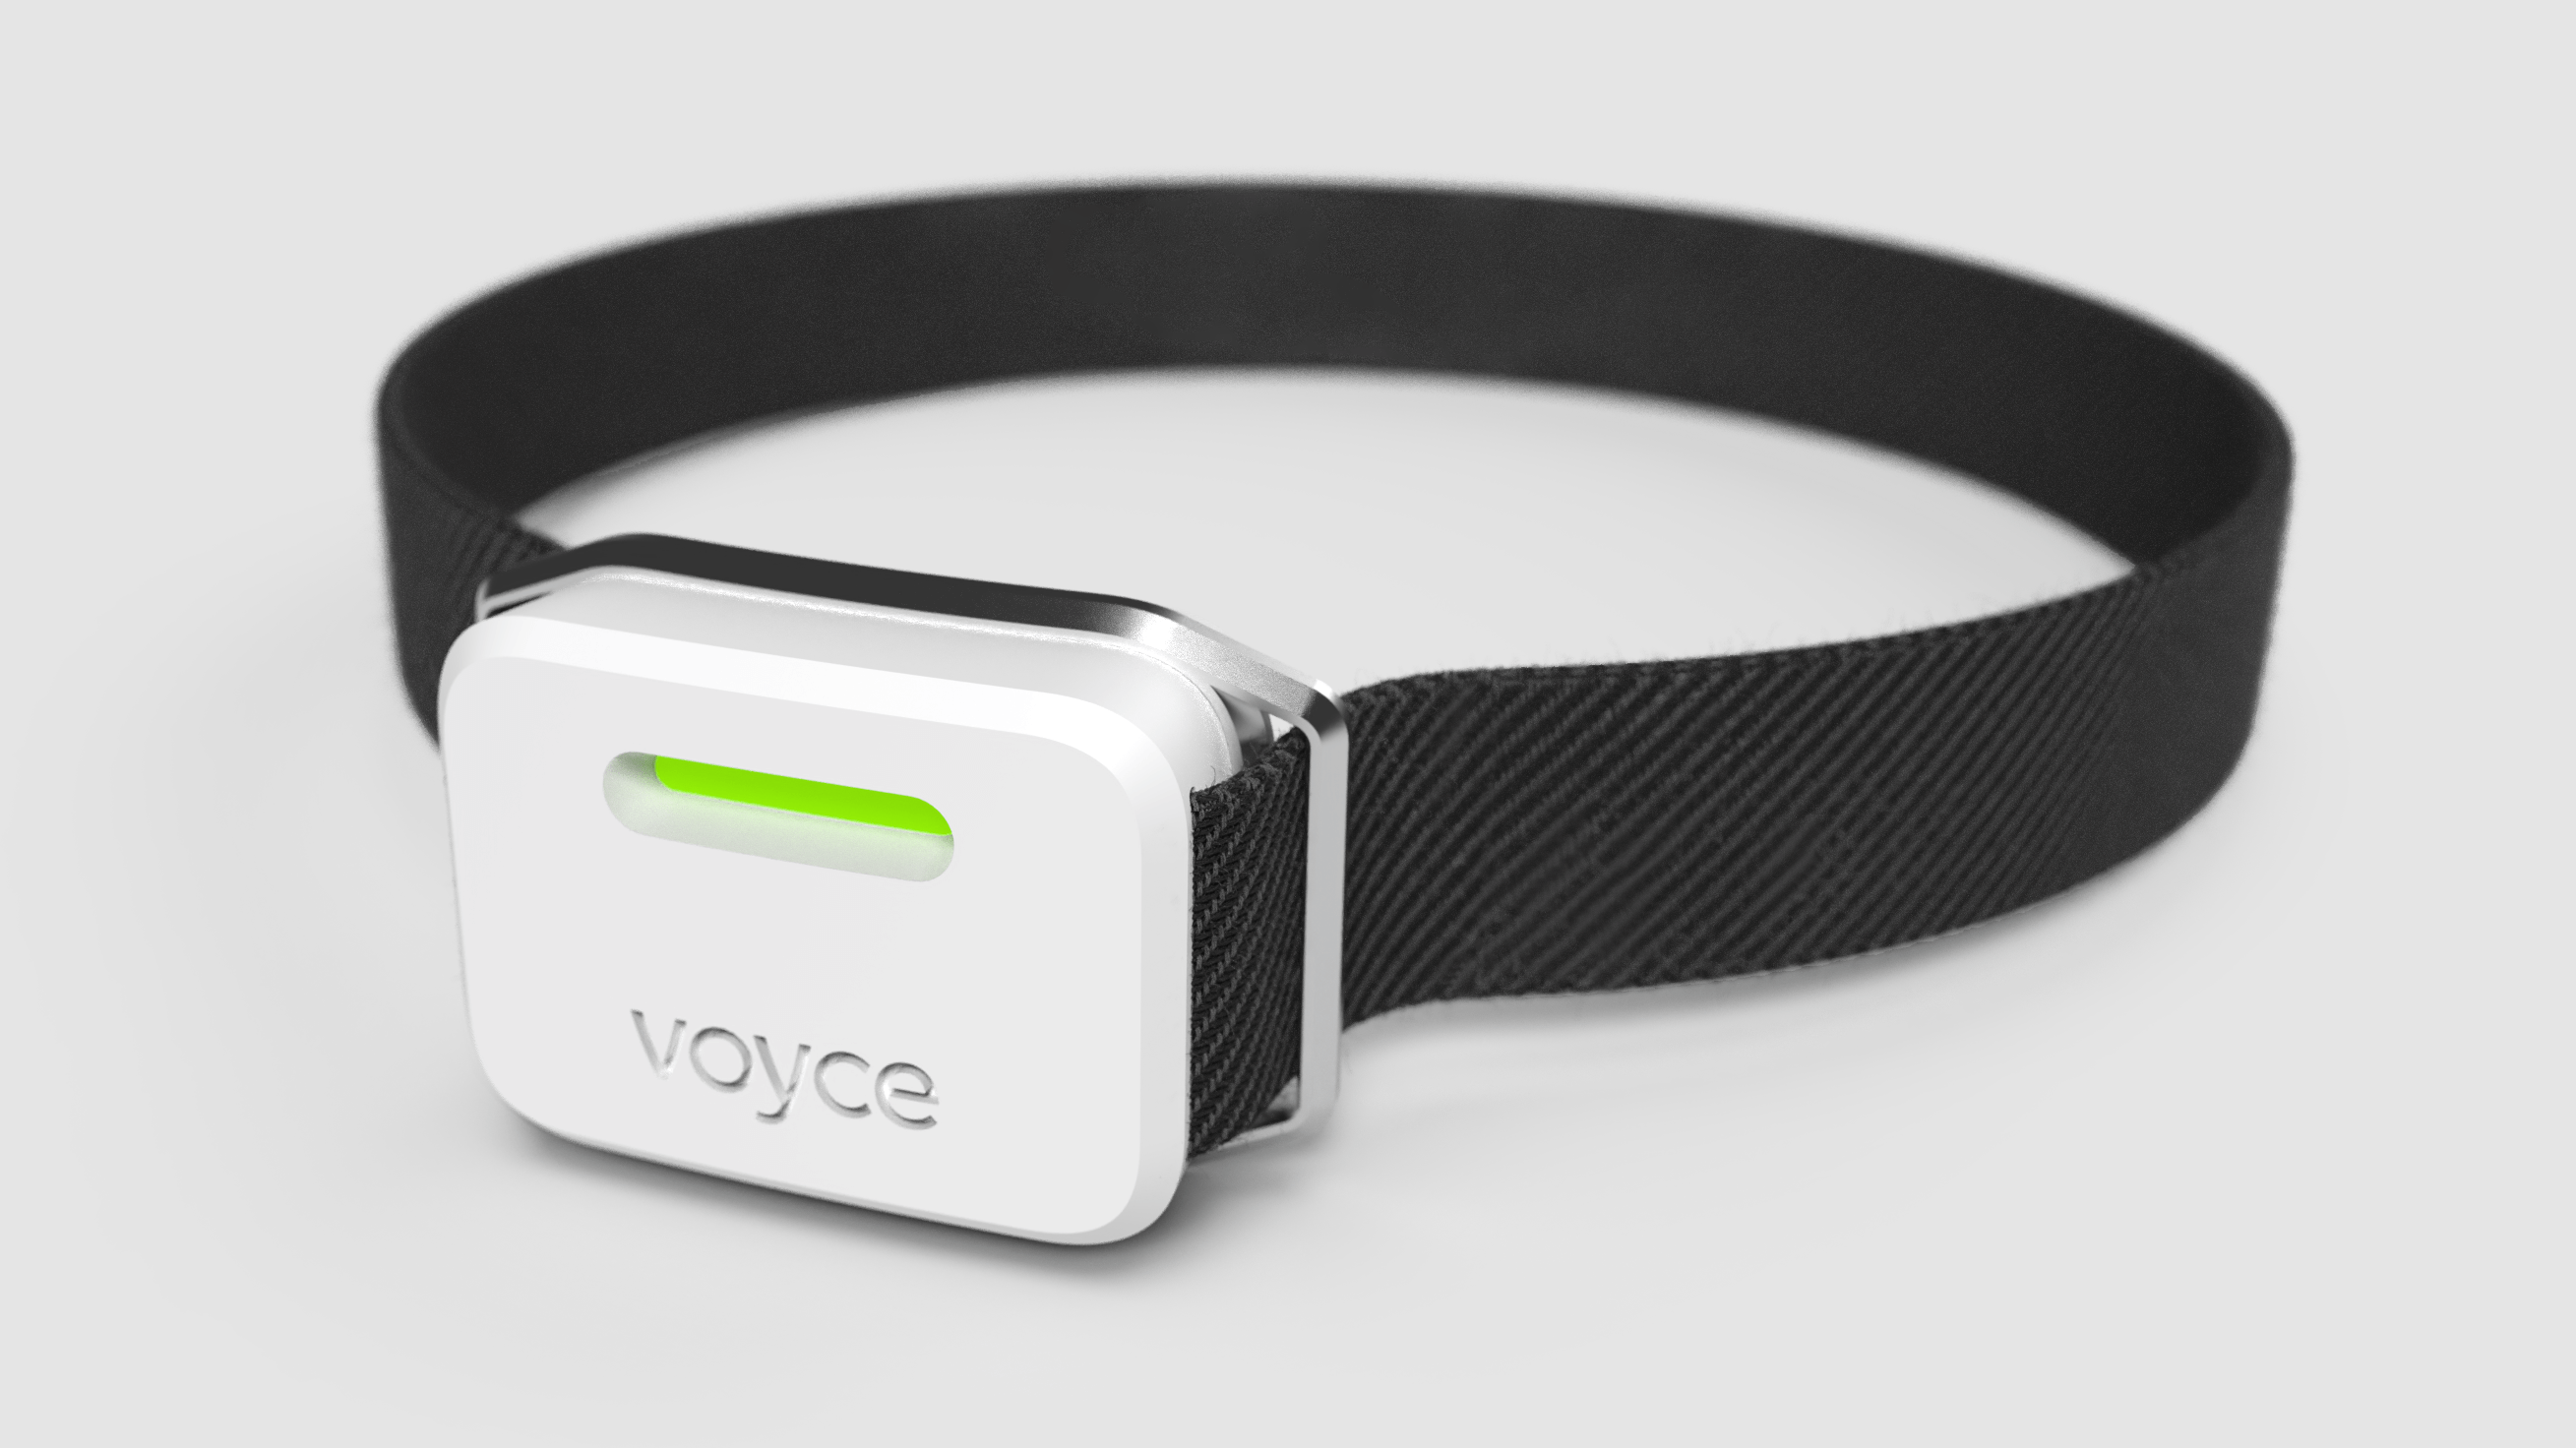 Black pet collar with integrated One Health Group's Voyce physiological monitoring device.